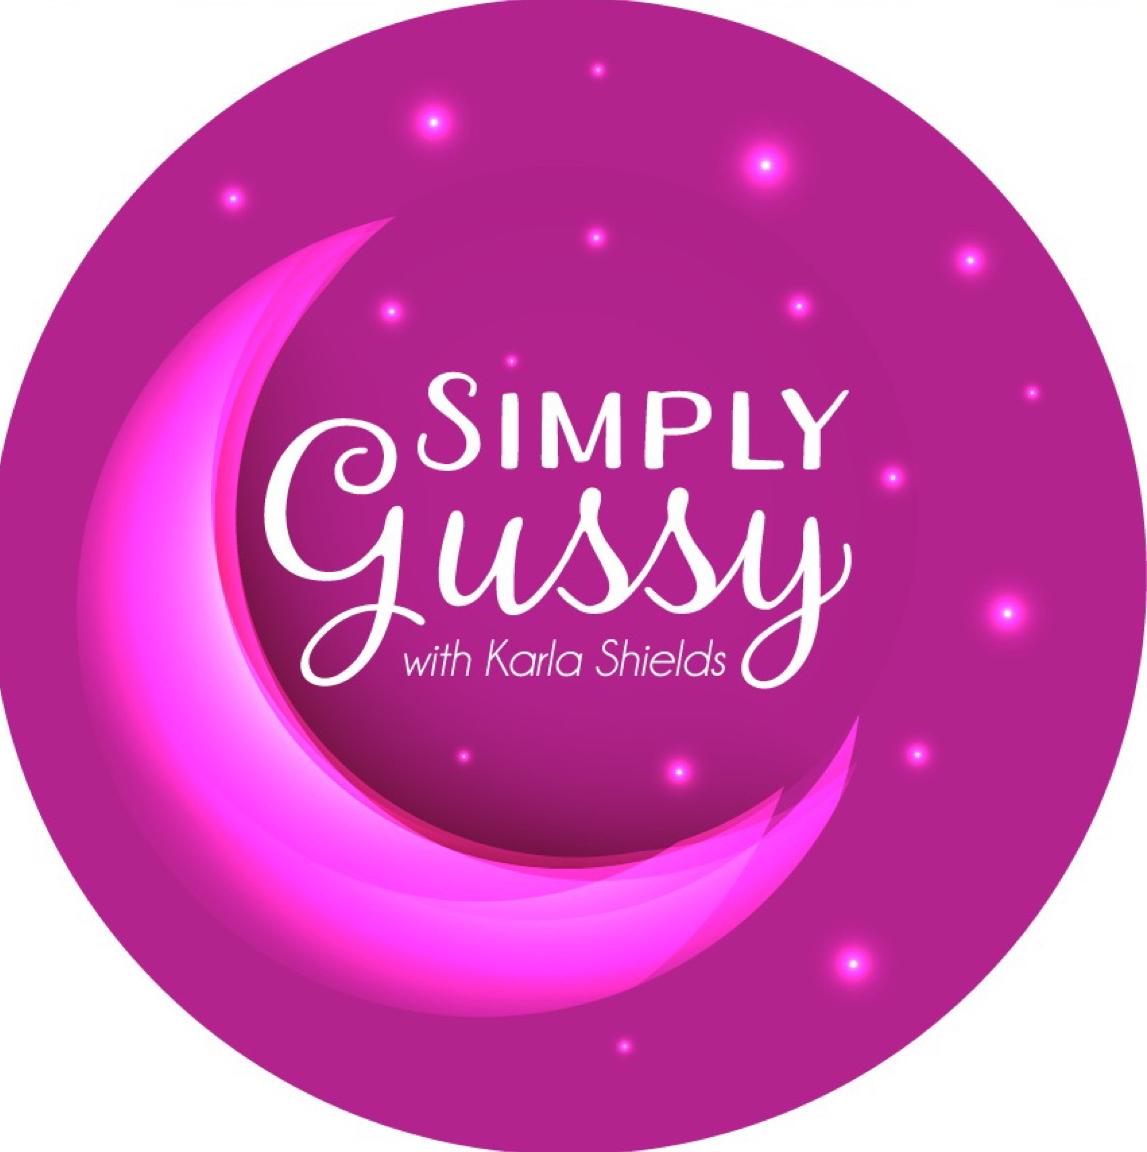 Simply Gussy's images